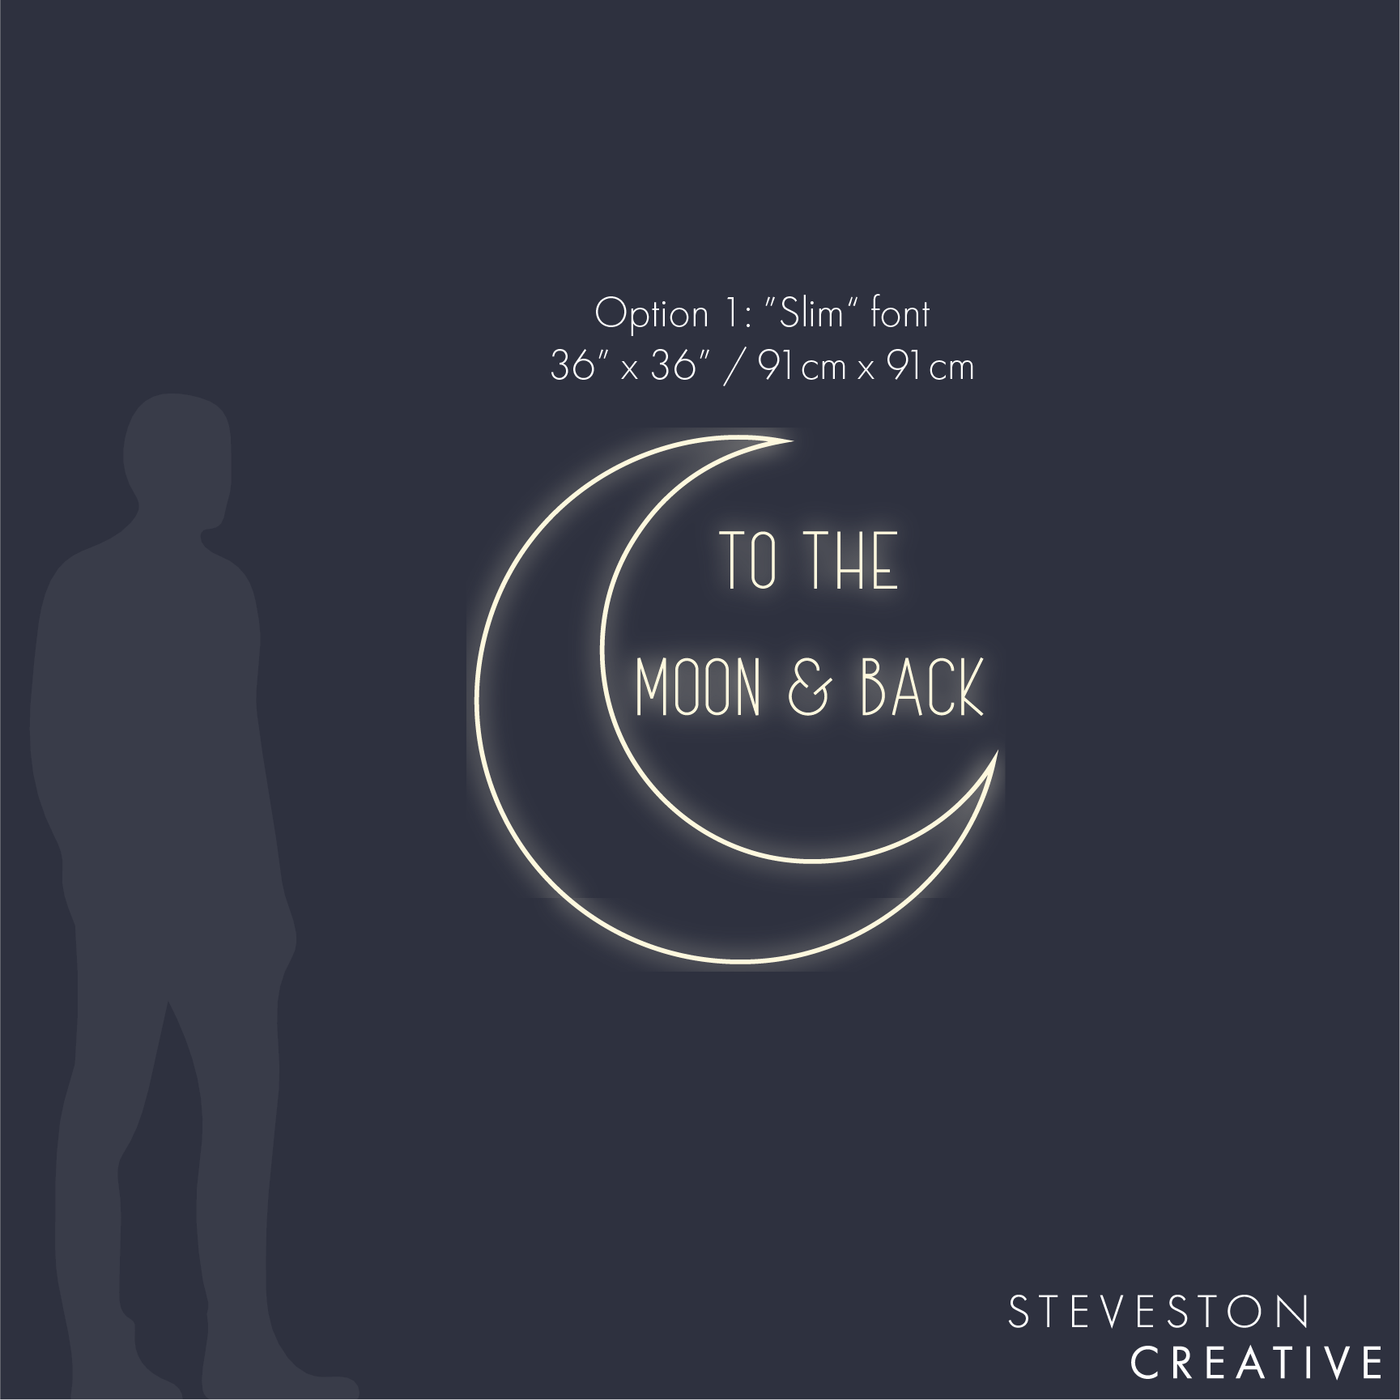 "To the moon and back" with crescent moon shape